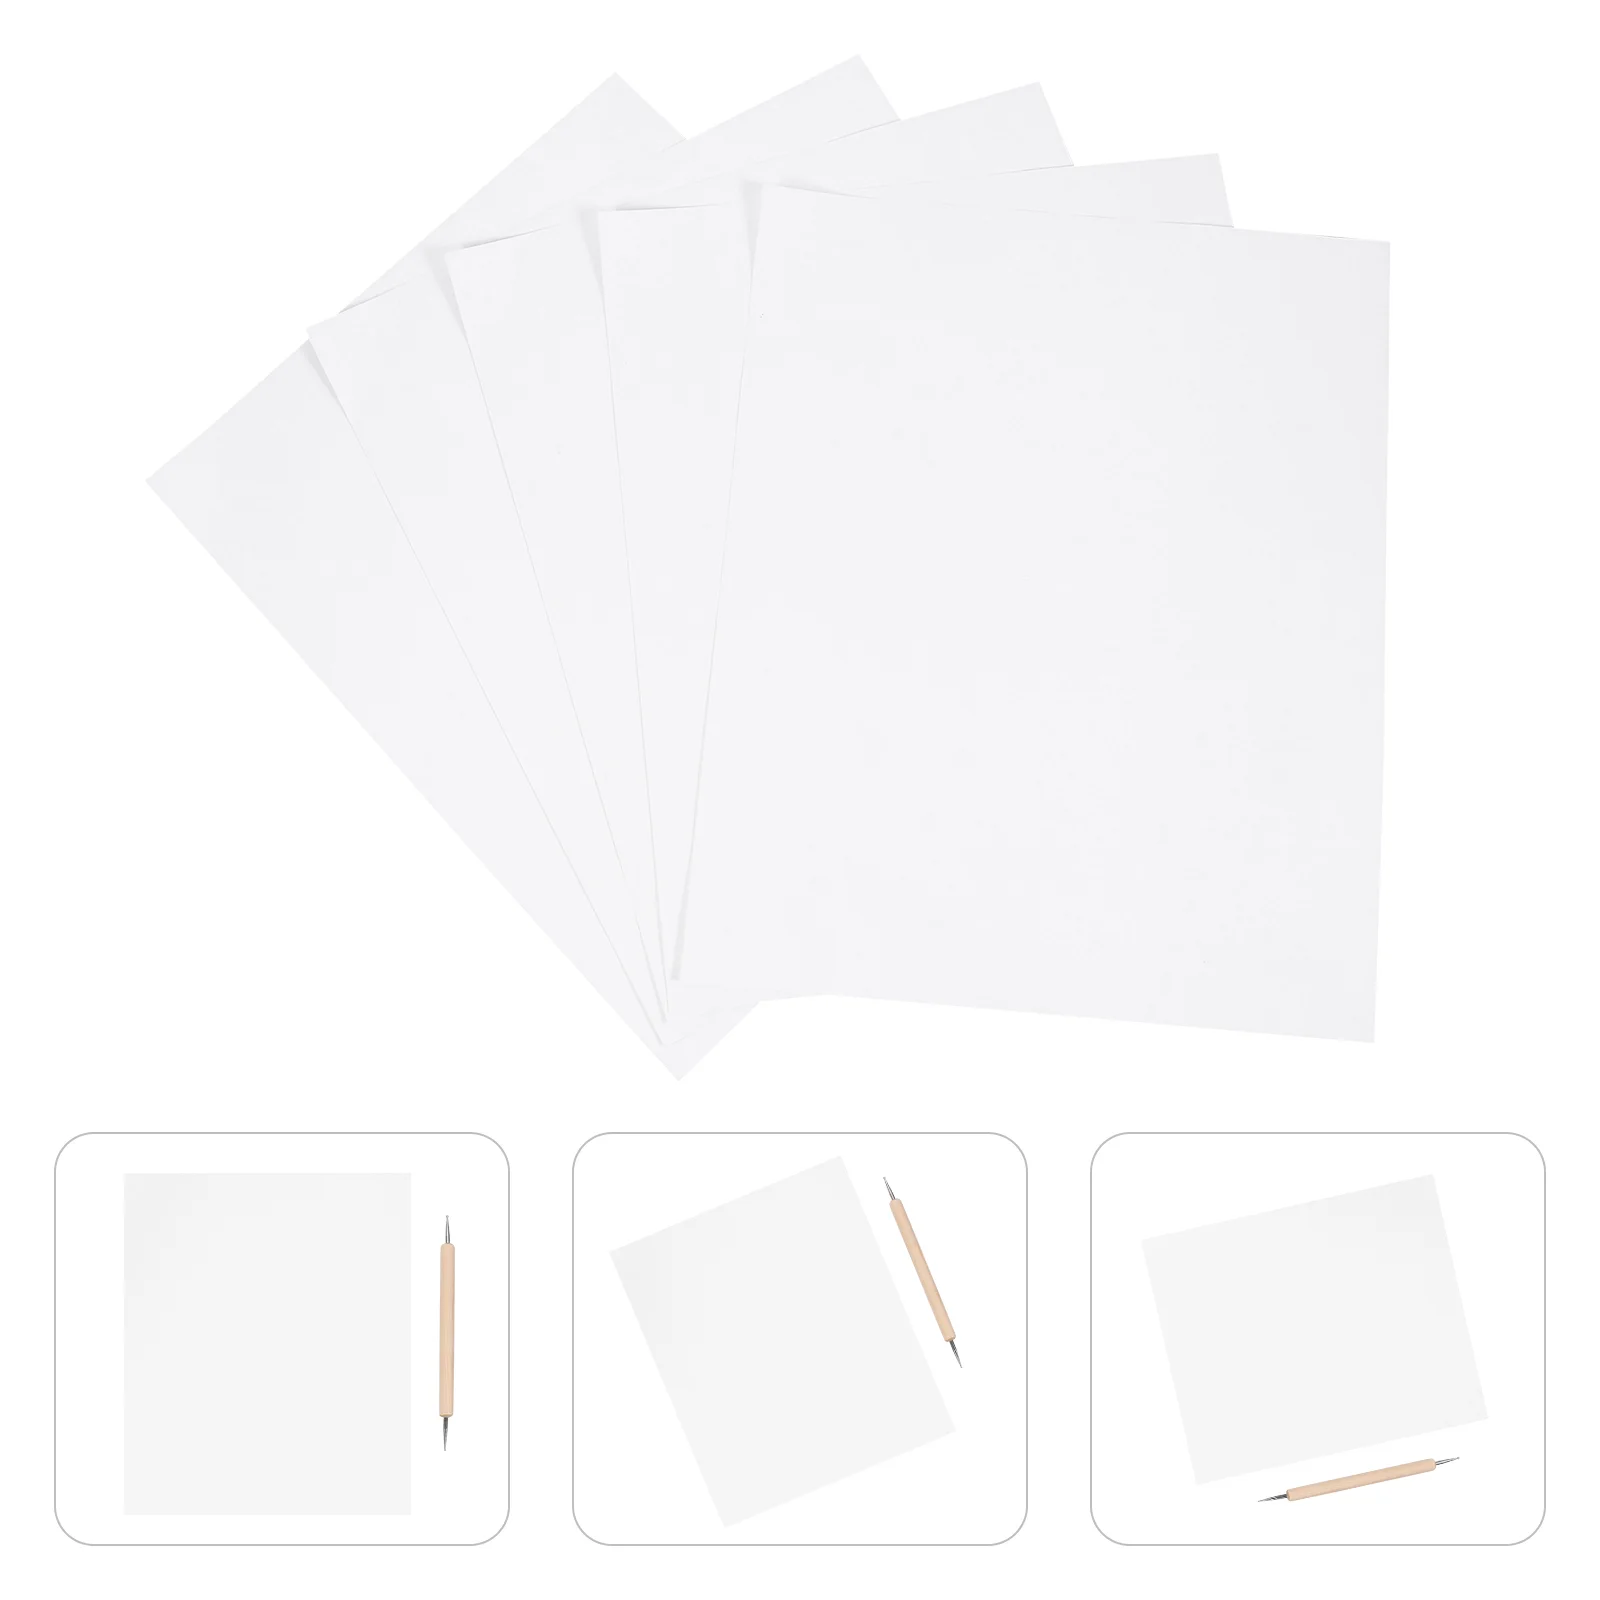 10Pcs Drawing Embroidery Paper Carbon Paper for Tracing Carbon Paper for Tracing On Wood Carbon Paper